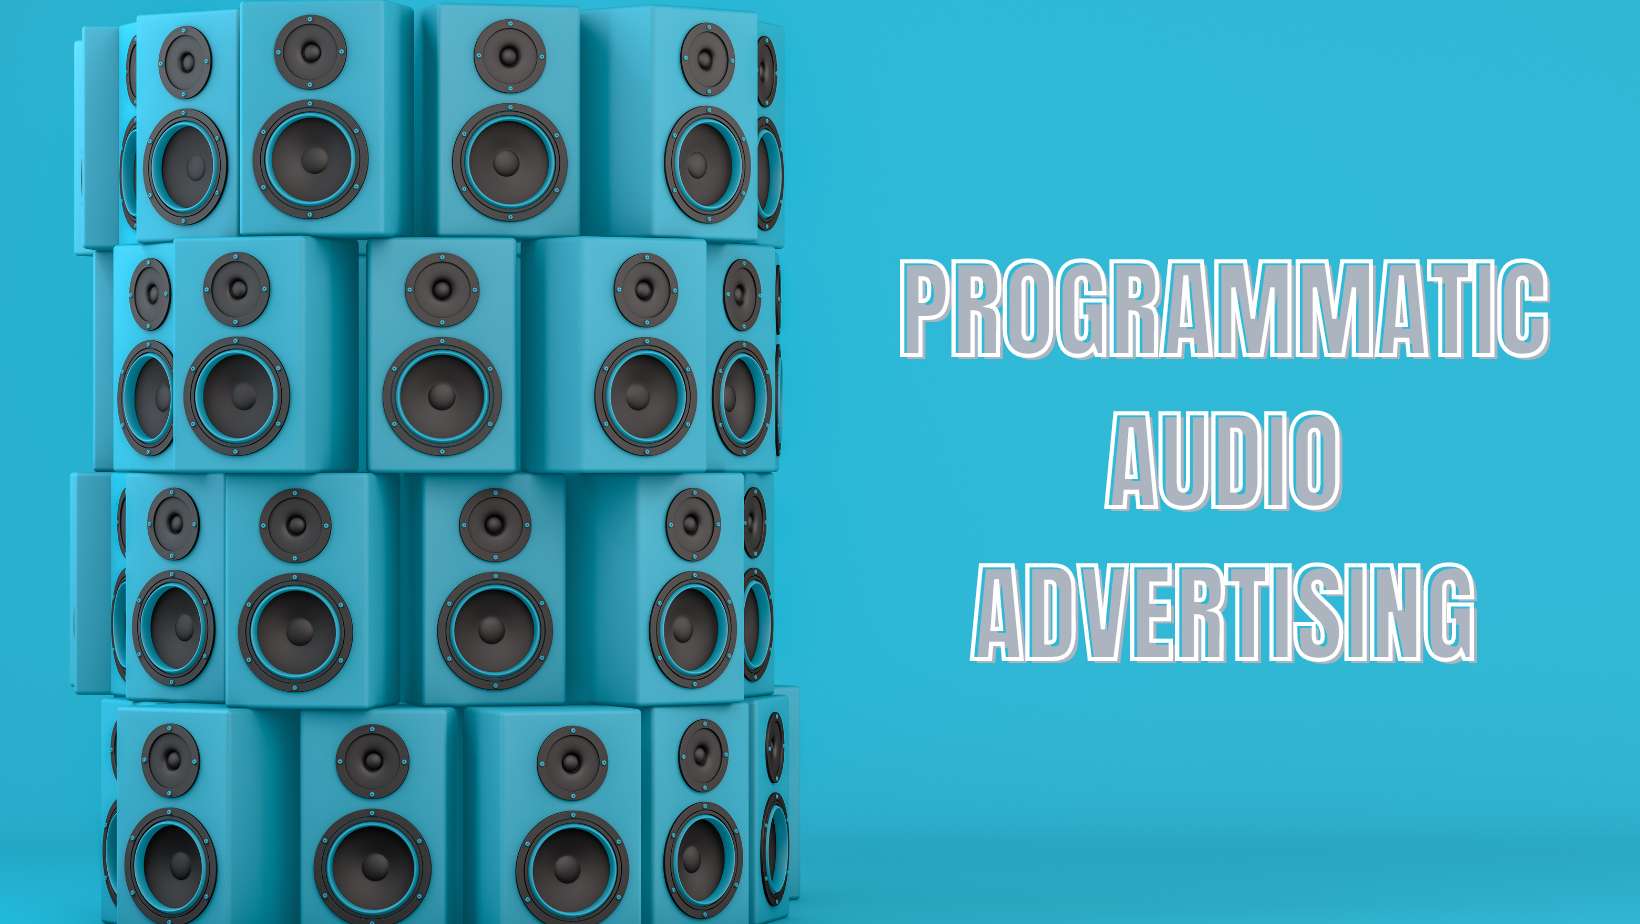 WHAT IS PROGRAMMATIC AUDIO ADVERTISING AND HOW TO DO IT